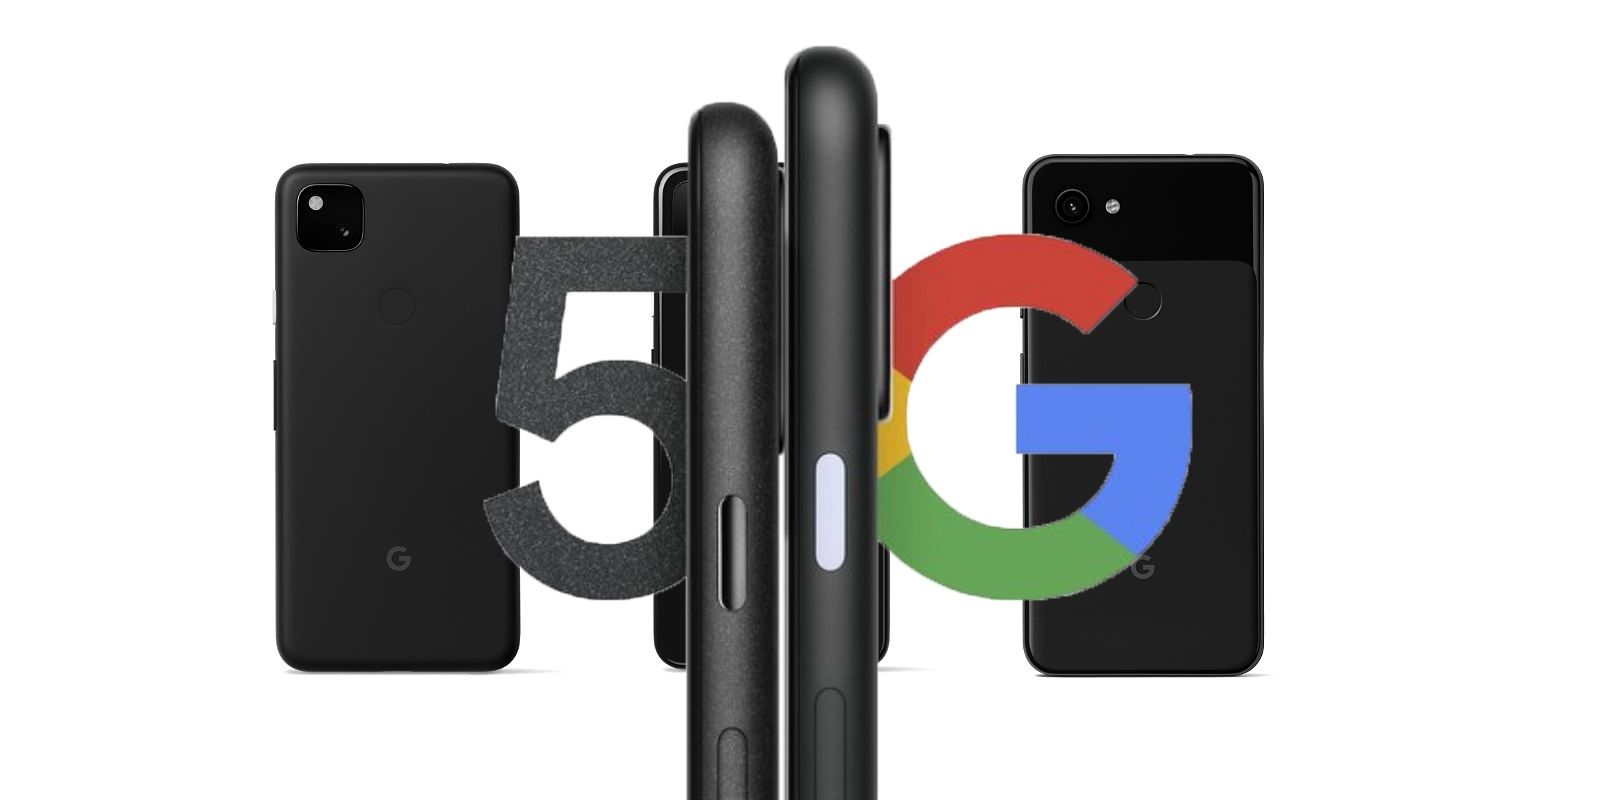 Google Pixel 5 (& Pixel 4a 5G) Launch Date Might Be October 8